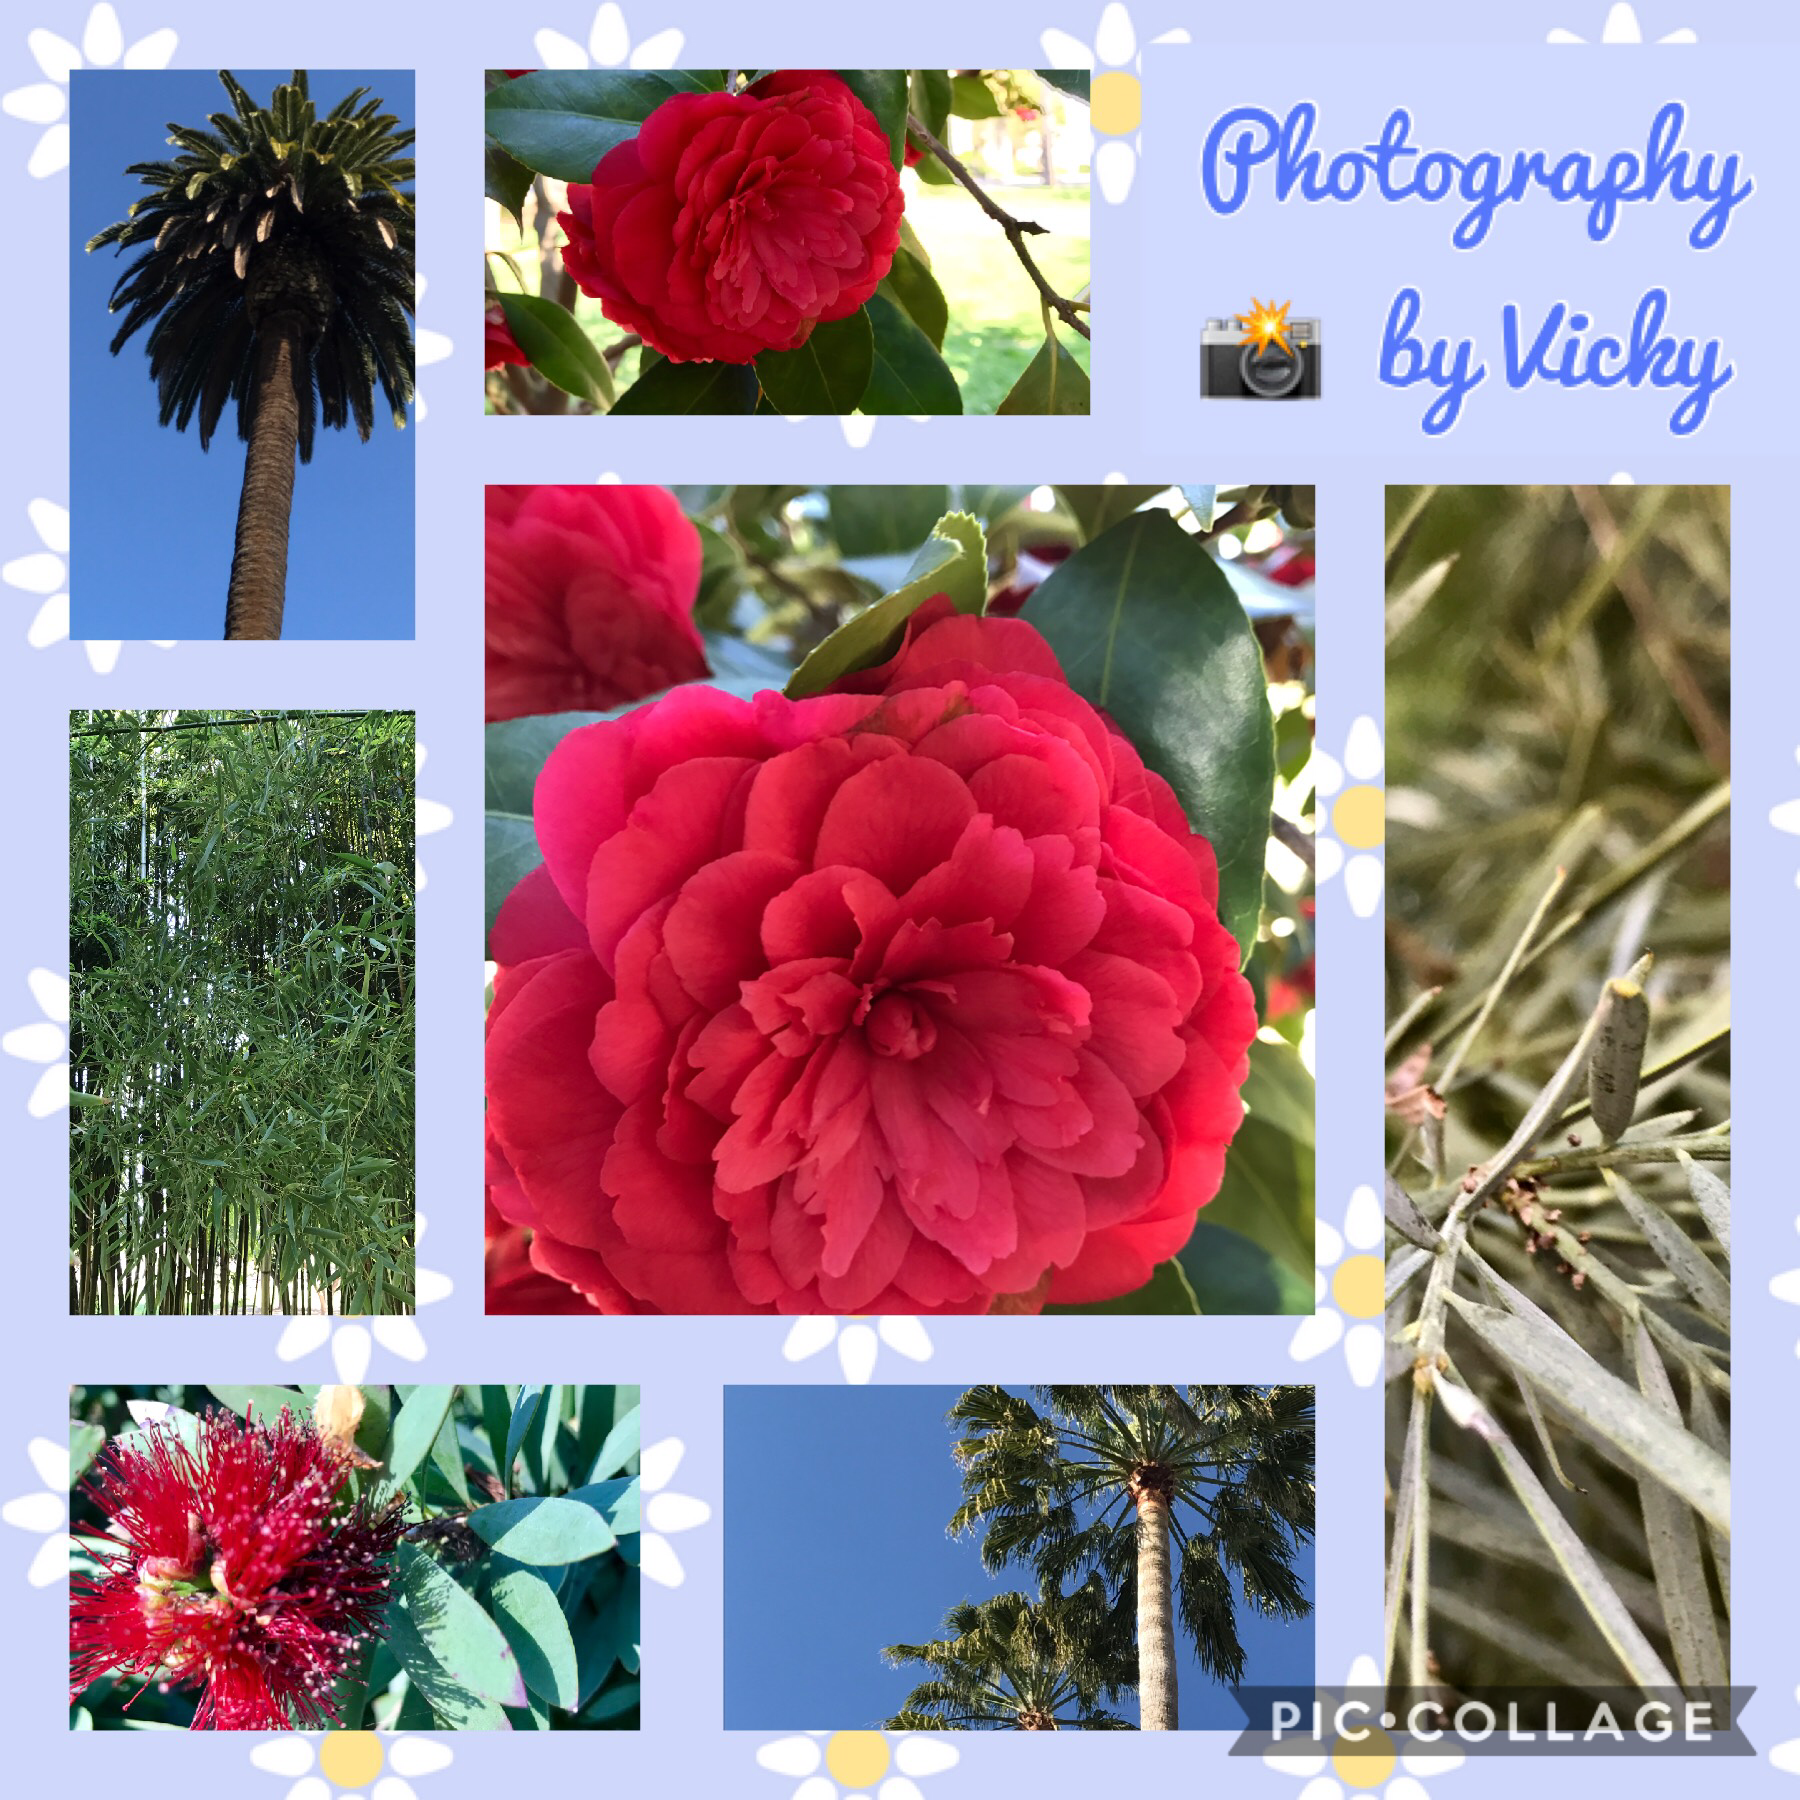 Pics were taken in the Governors Garden. It is sooo pretty there!